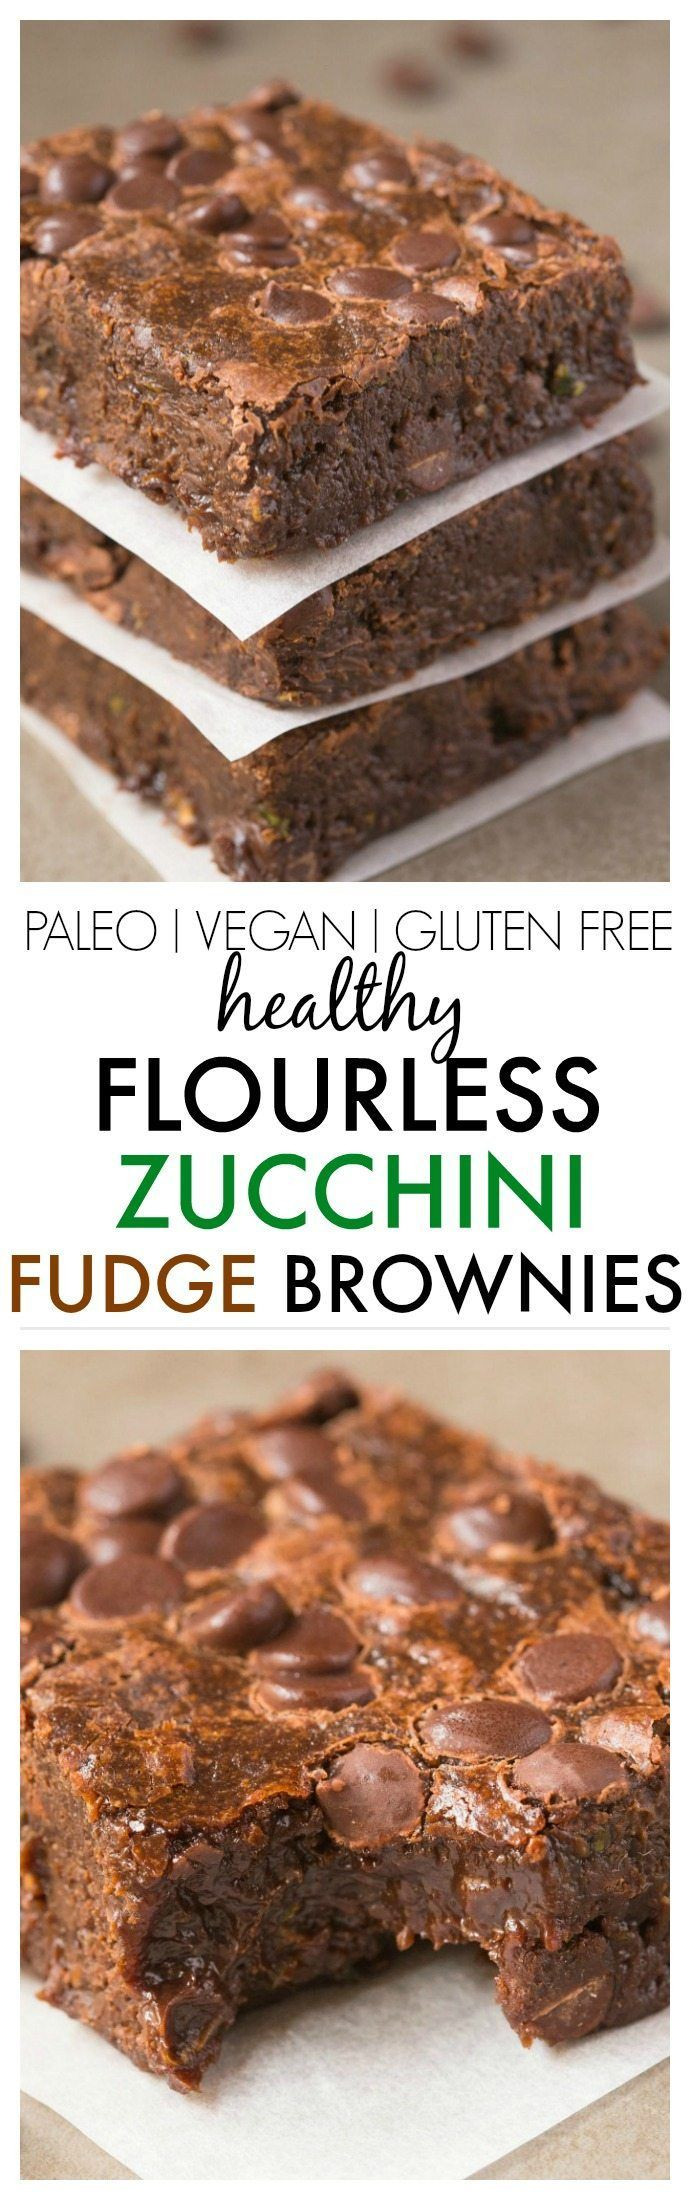 Healthy Brownies Recipe
 Healthy Flourless Zucchini Fudge Brownies made with NO